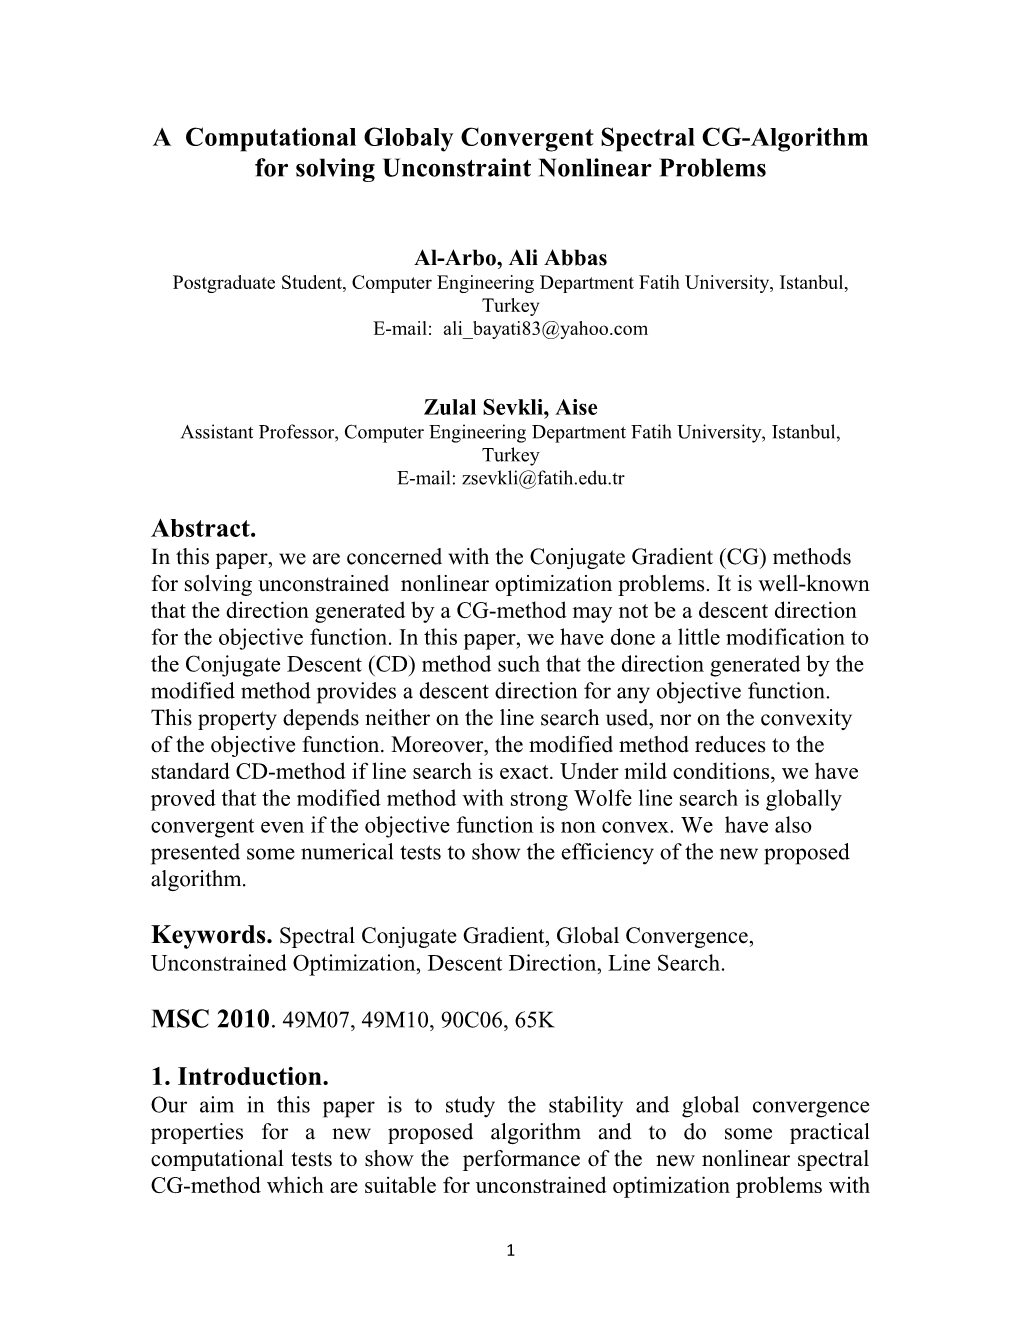 A Computational Globaly Convergent Spectral CG-Algorithm for Solving Unconstraint Nonlinear